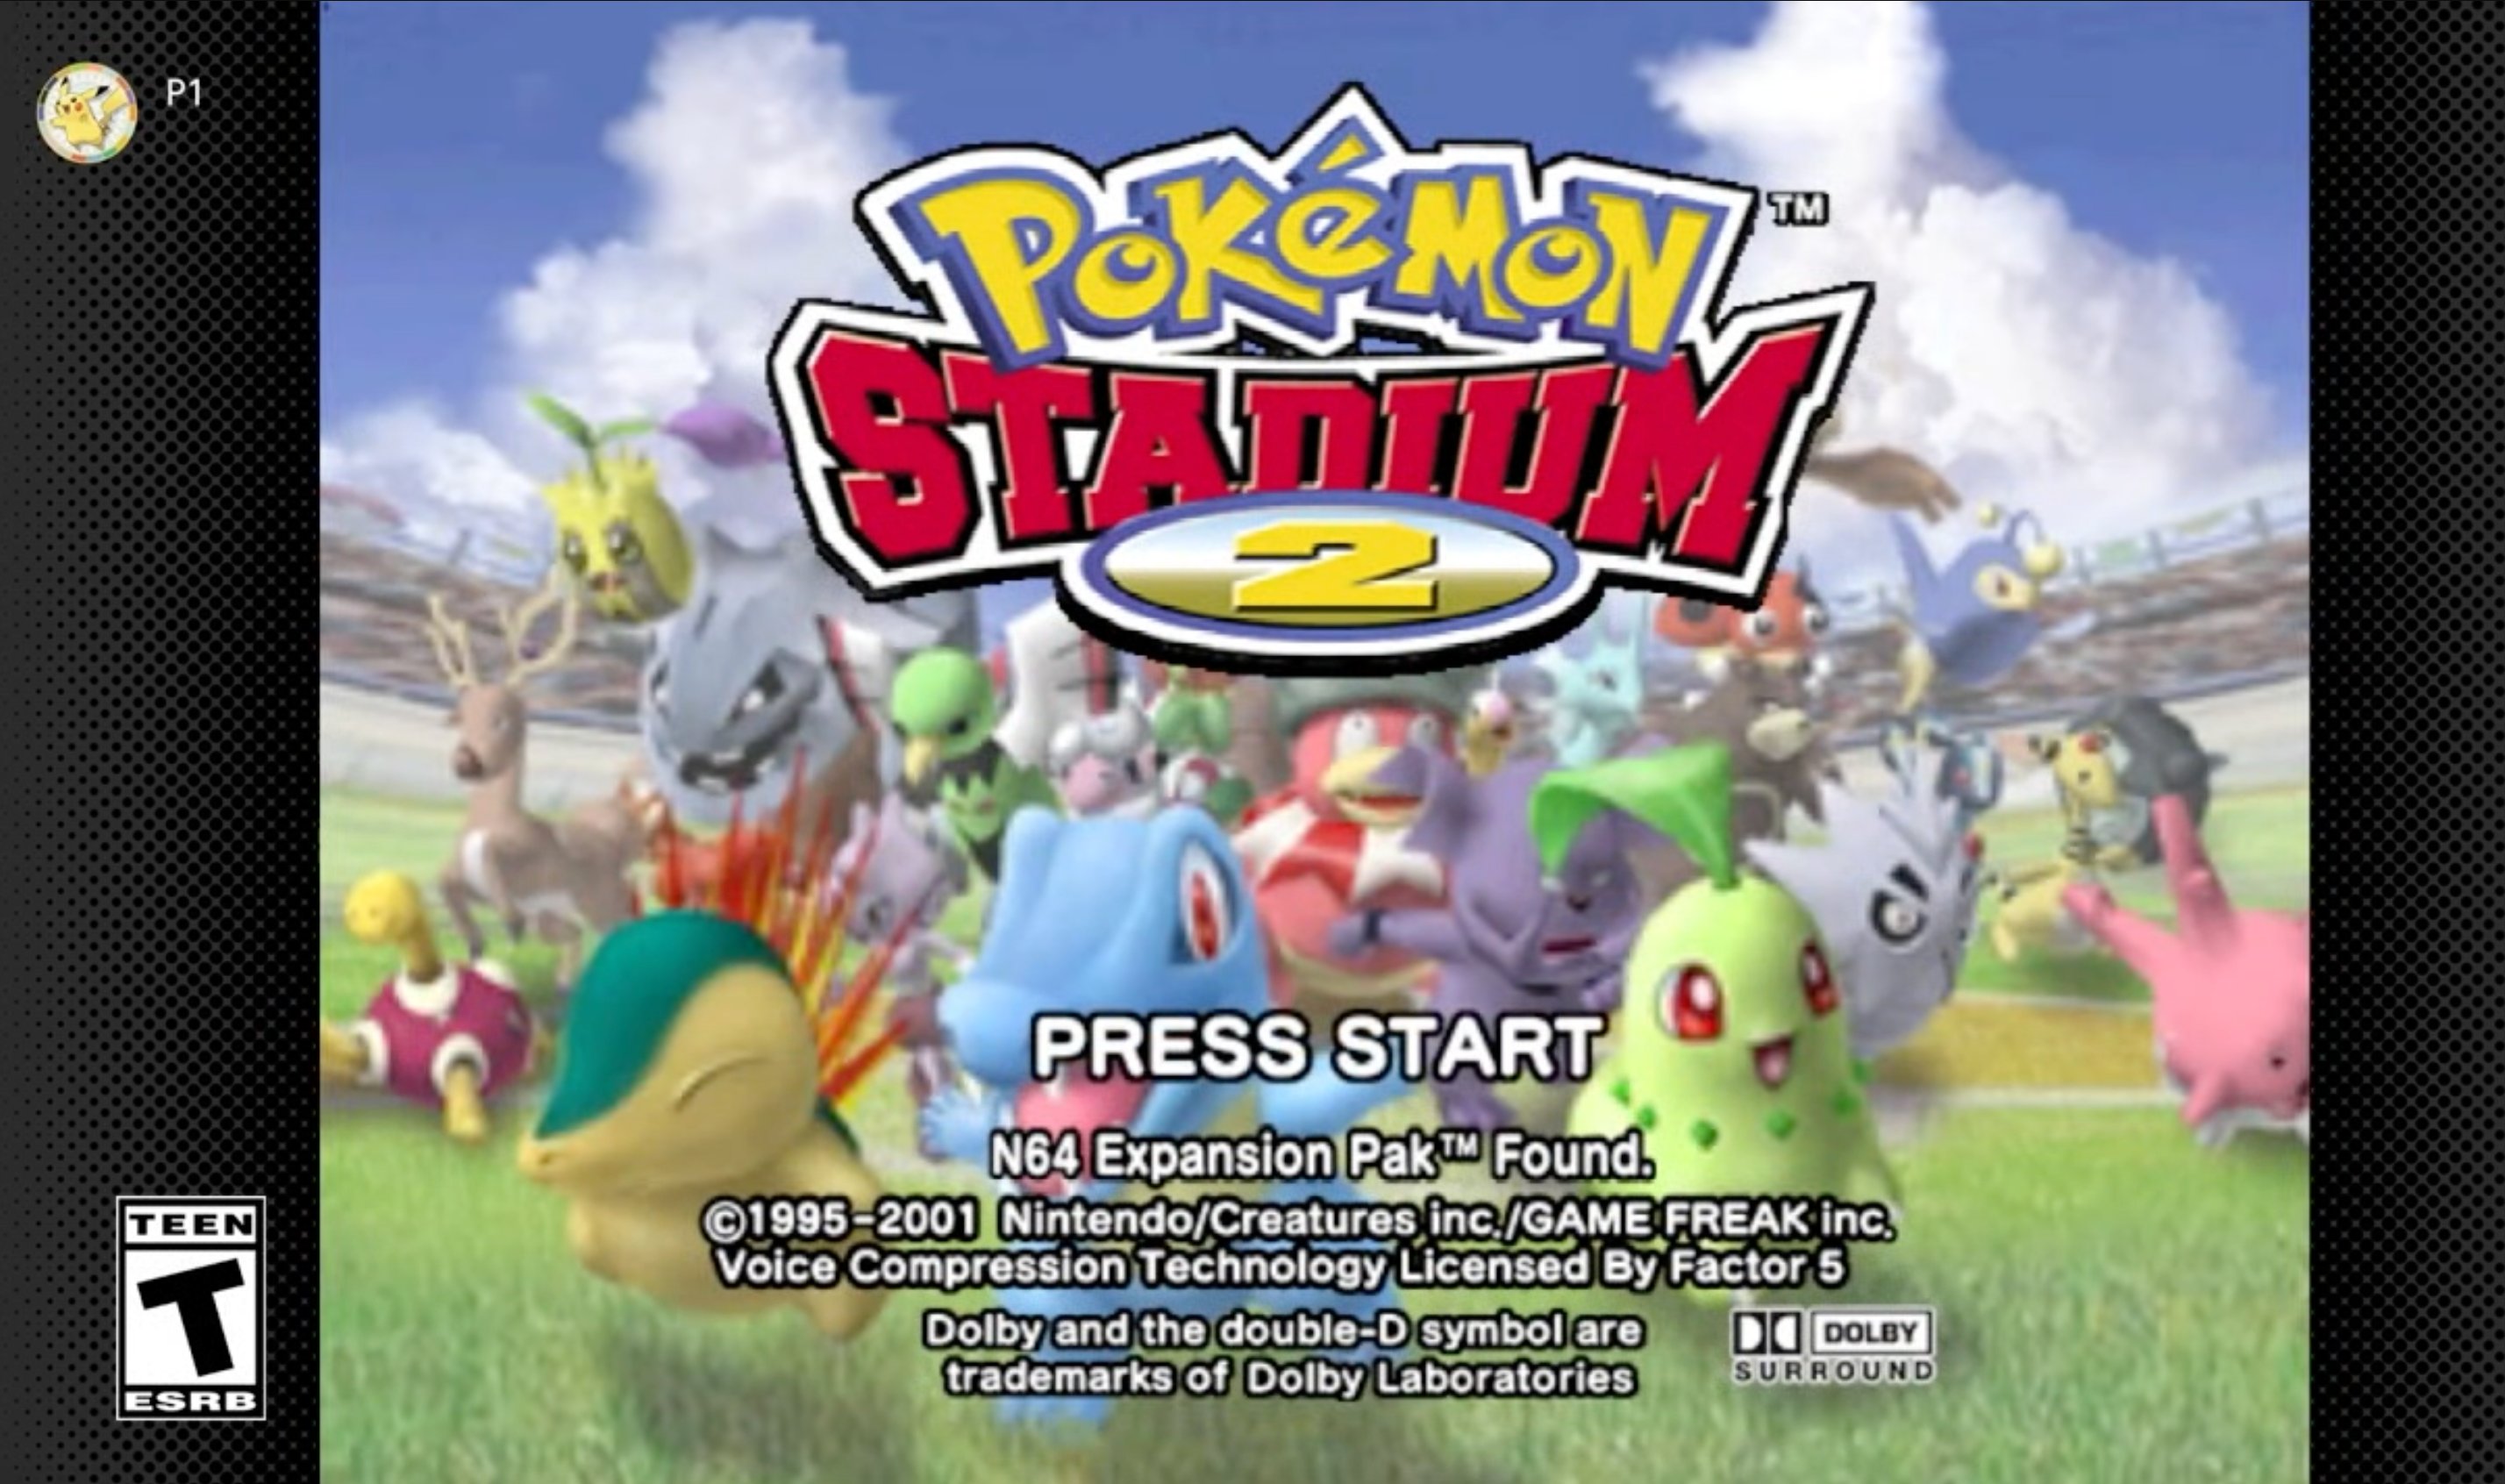 Pokémon Stadium is coming to Nintendo Switch, complete with all of